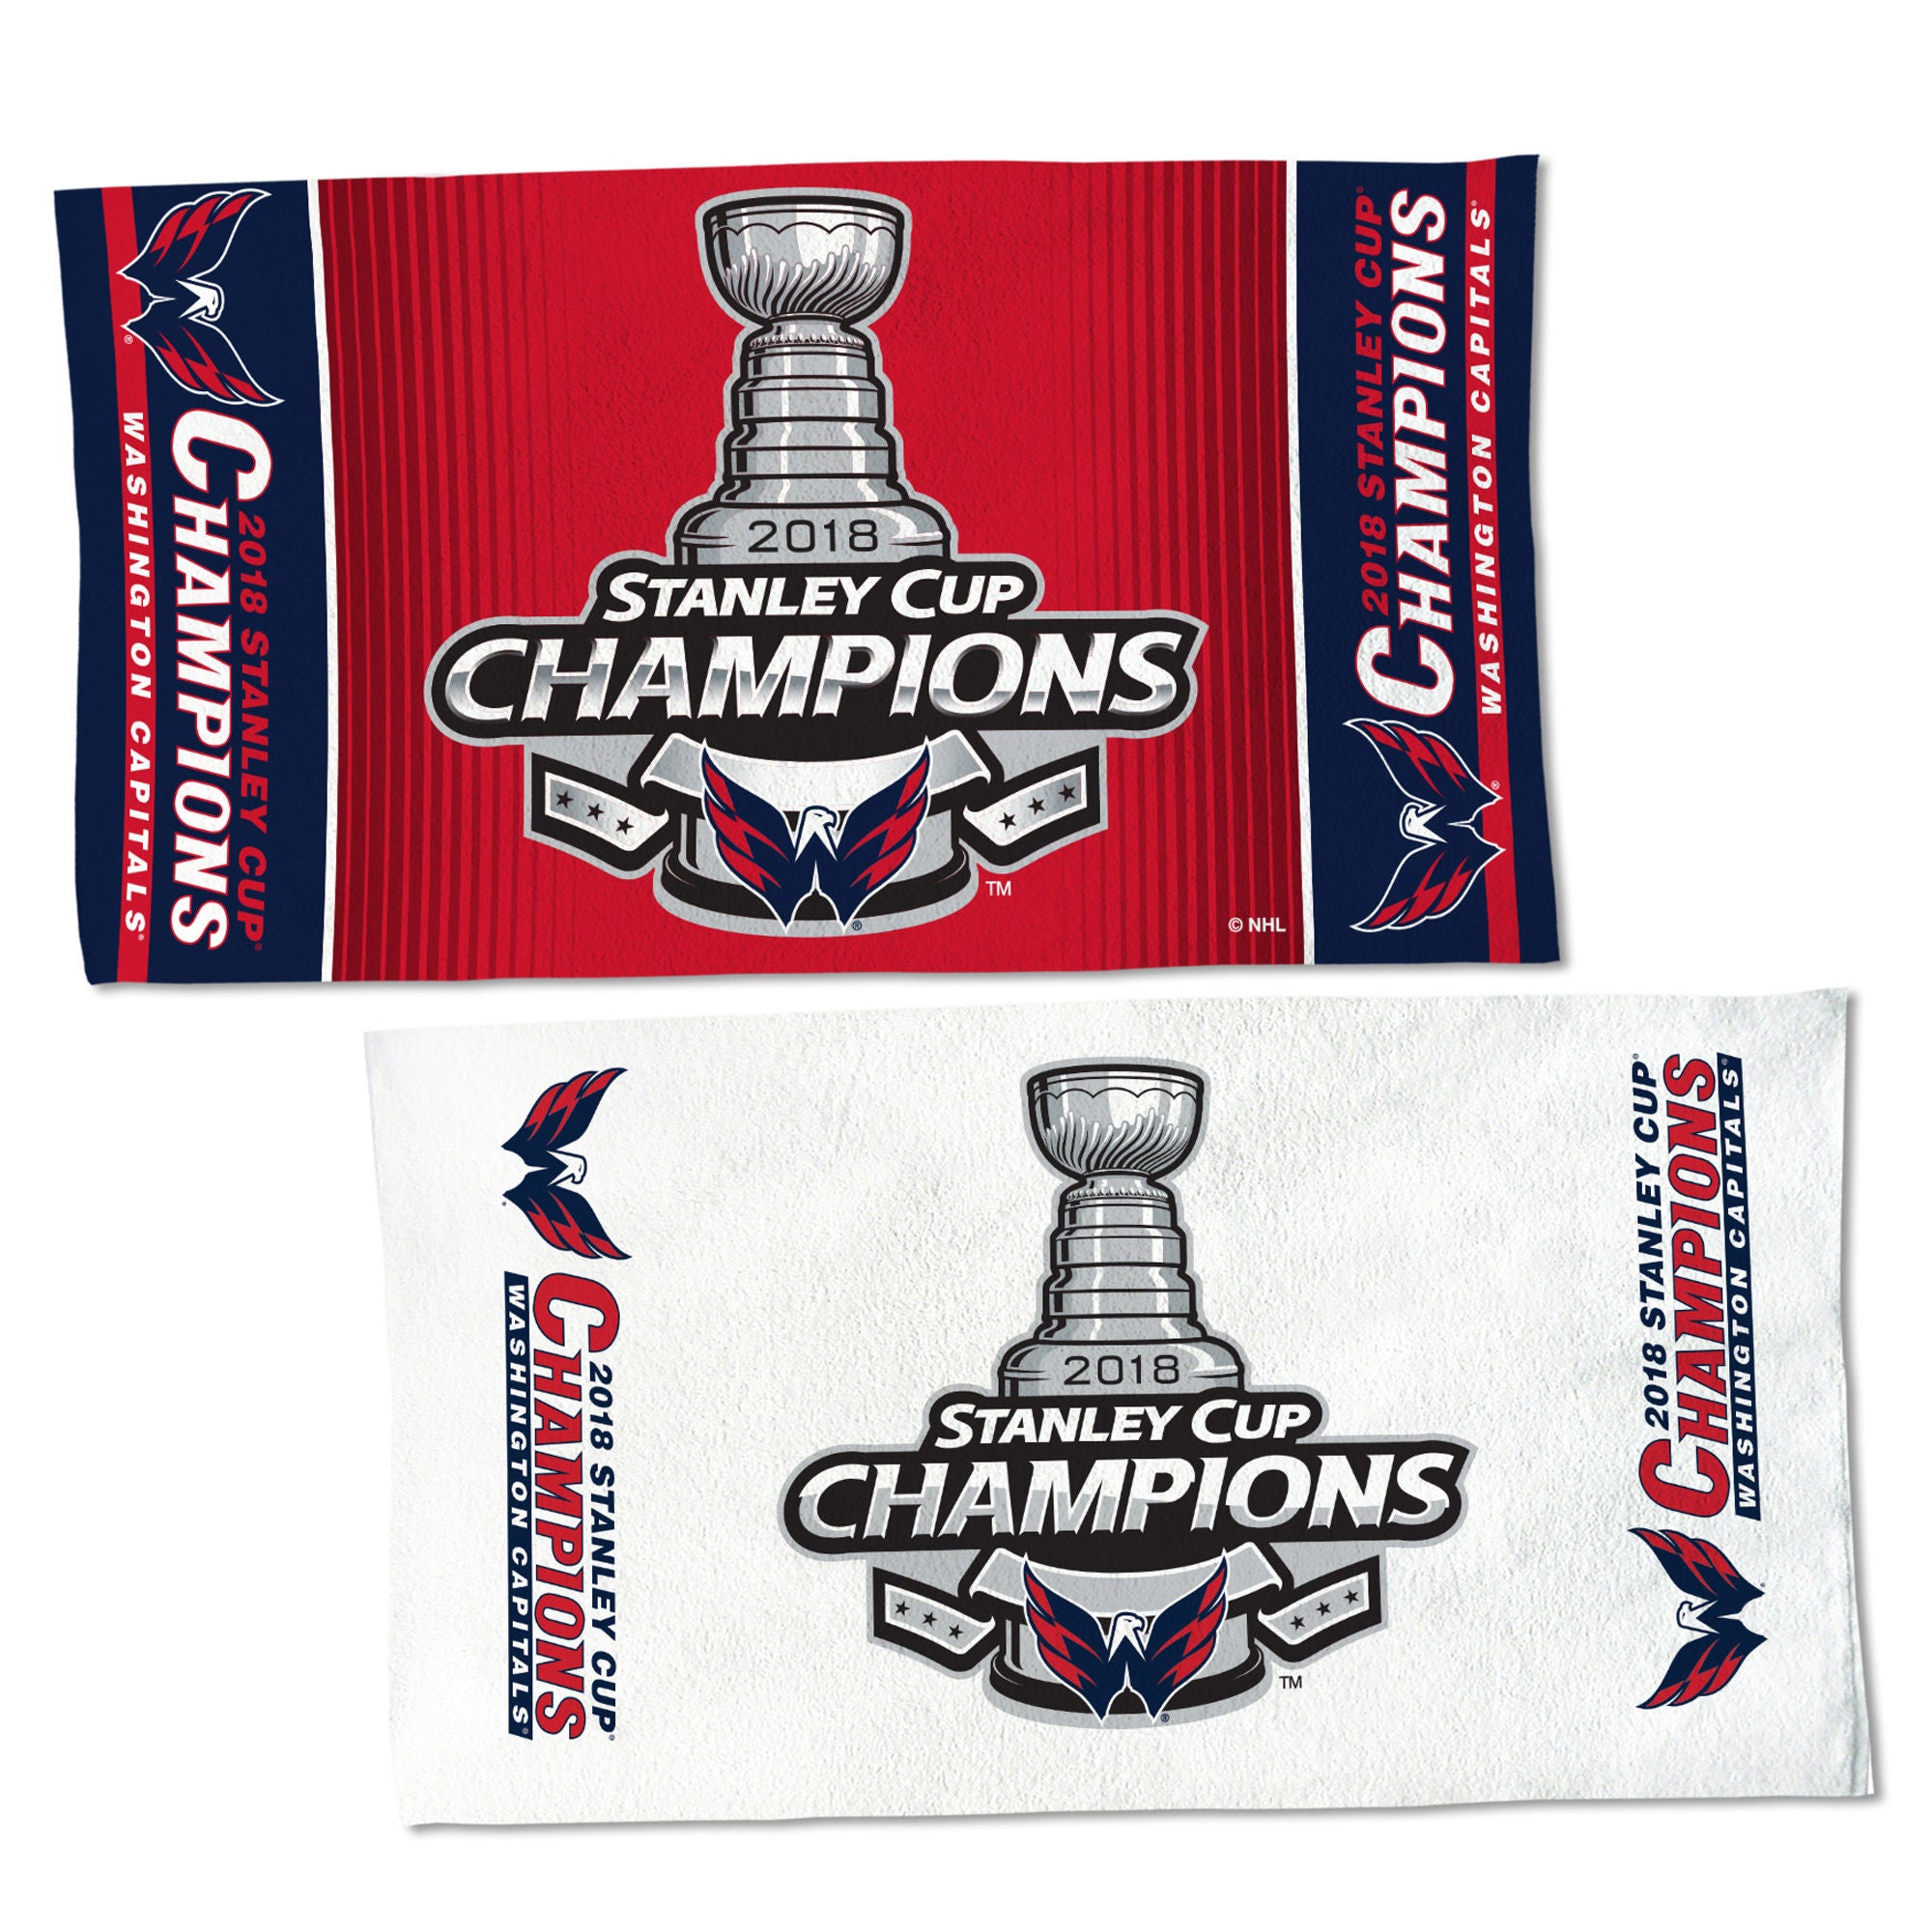 Discounted Capitals Stanley Cup championship gear available as low as $1 or  $5 at MedStar Capitals Iceplex Team Store